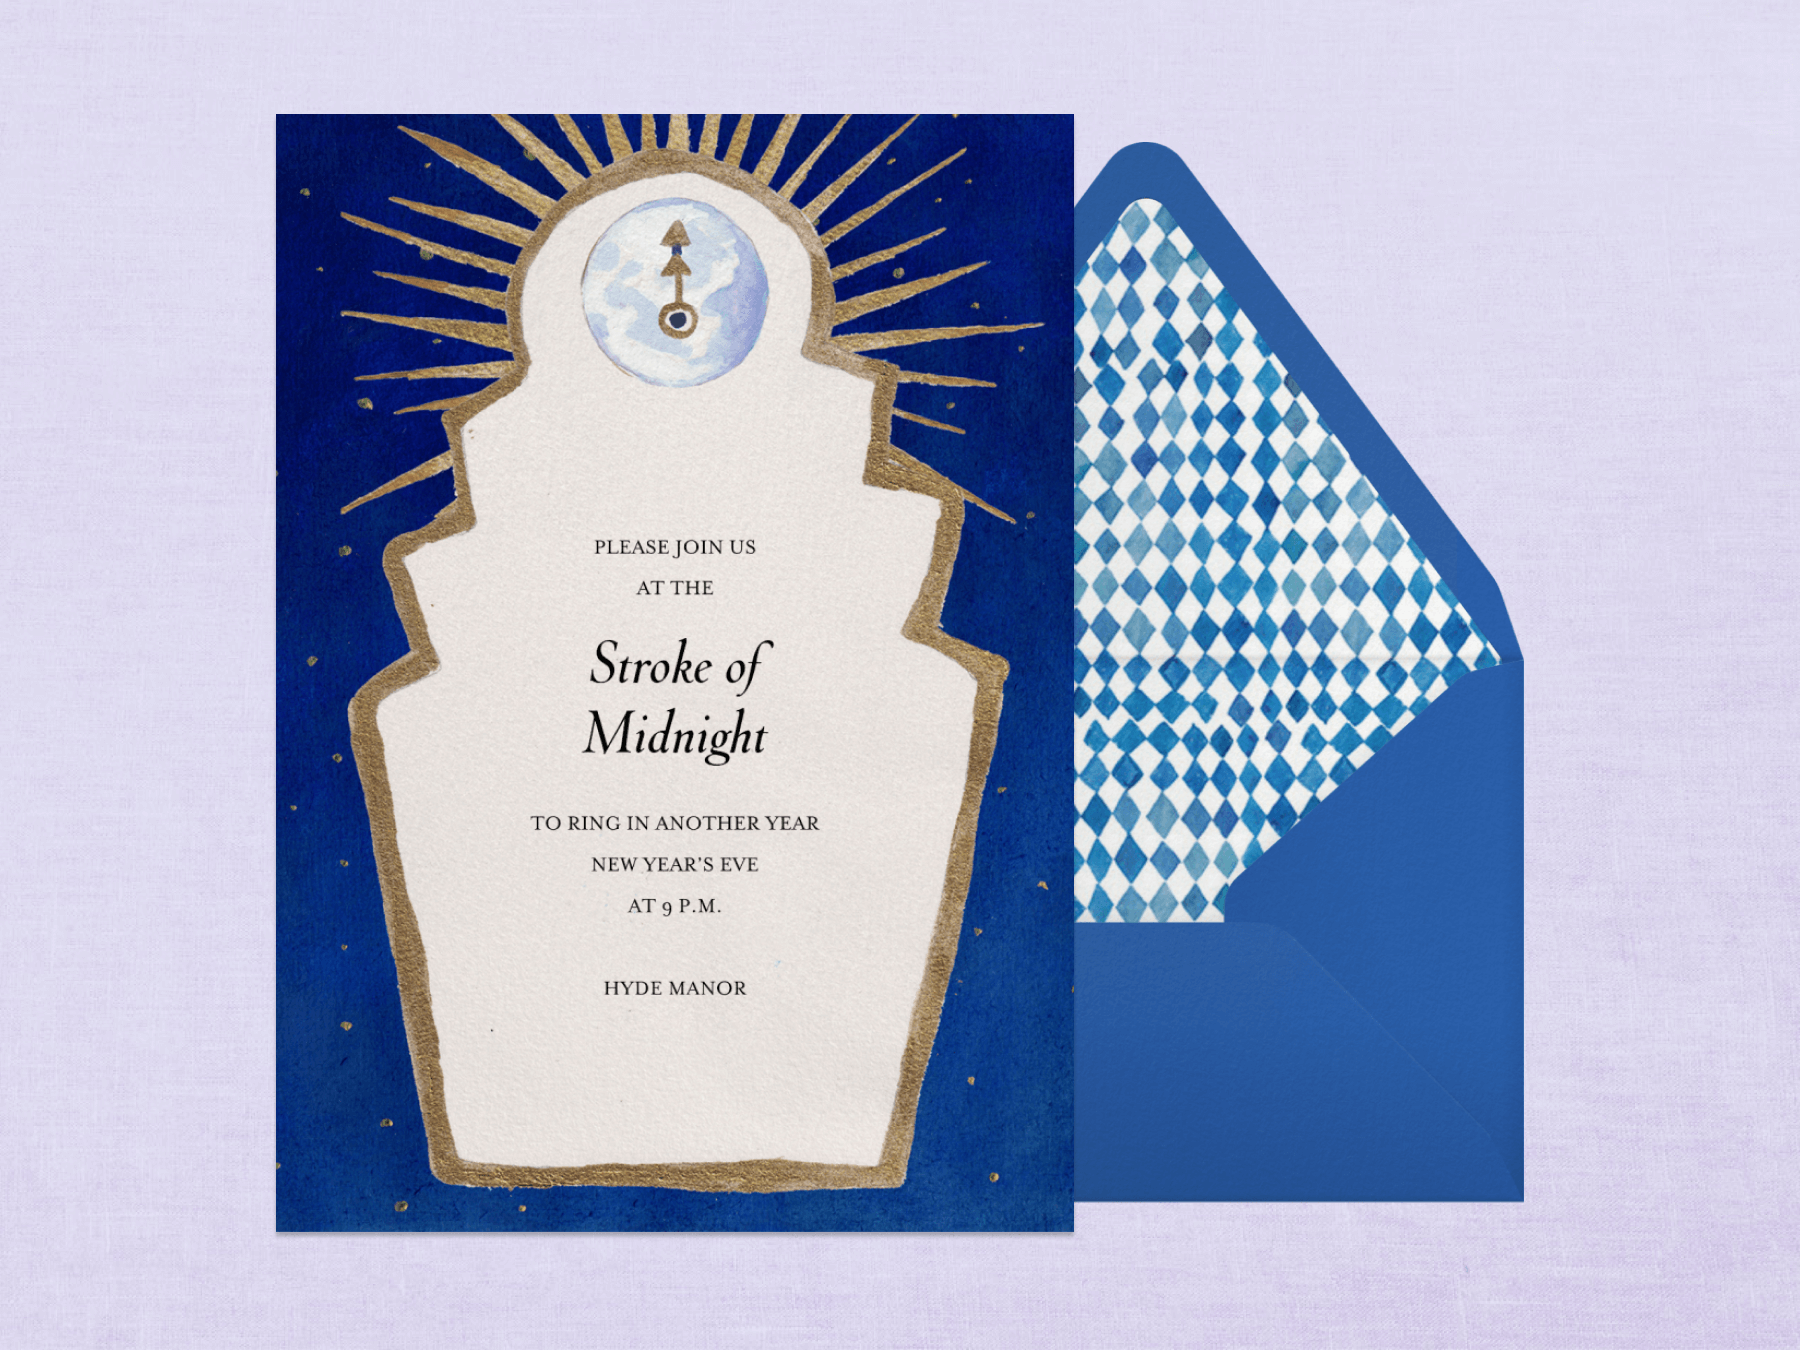 A blue New Year’s Eve party invitation with a white grandfather clock-inspired shape outline in gold and a clock face that looks like a full moon with gold hands pointing to midnight.